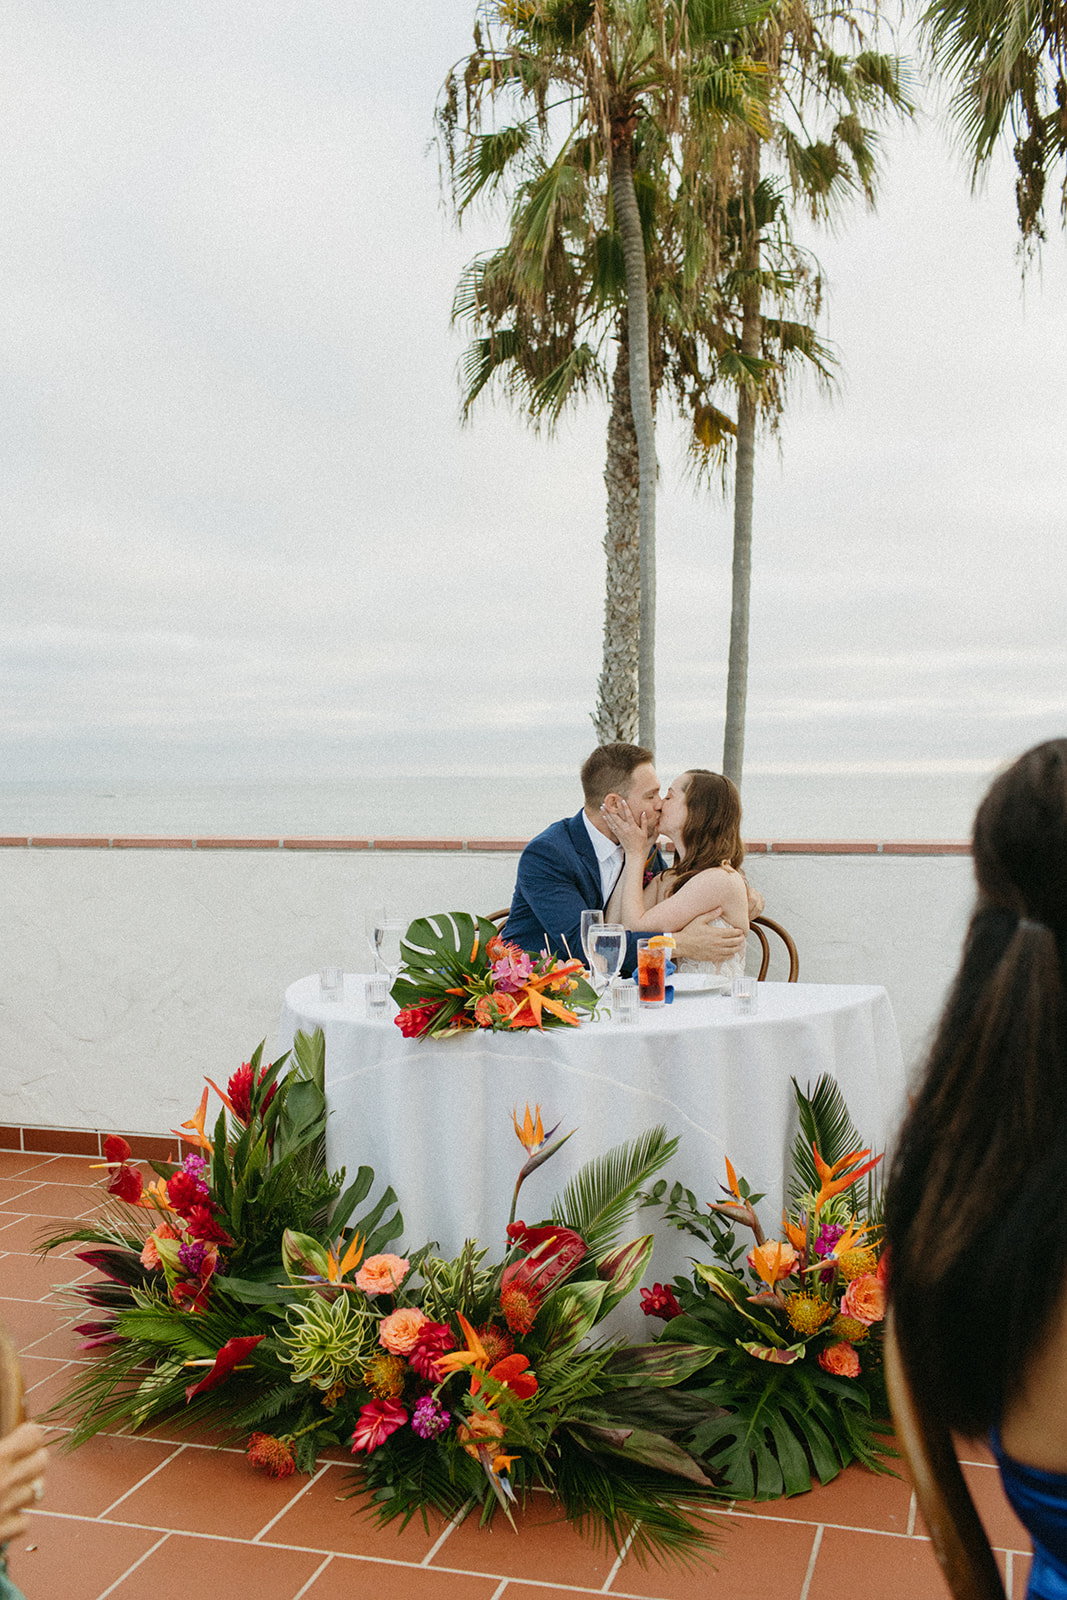 bride and groom kiss at sweetheart table with tropical floral arrangements and ocean in the background